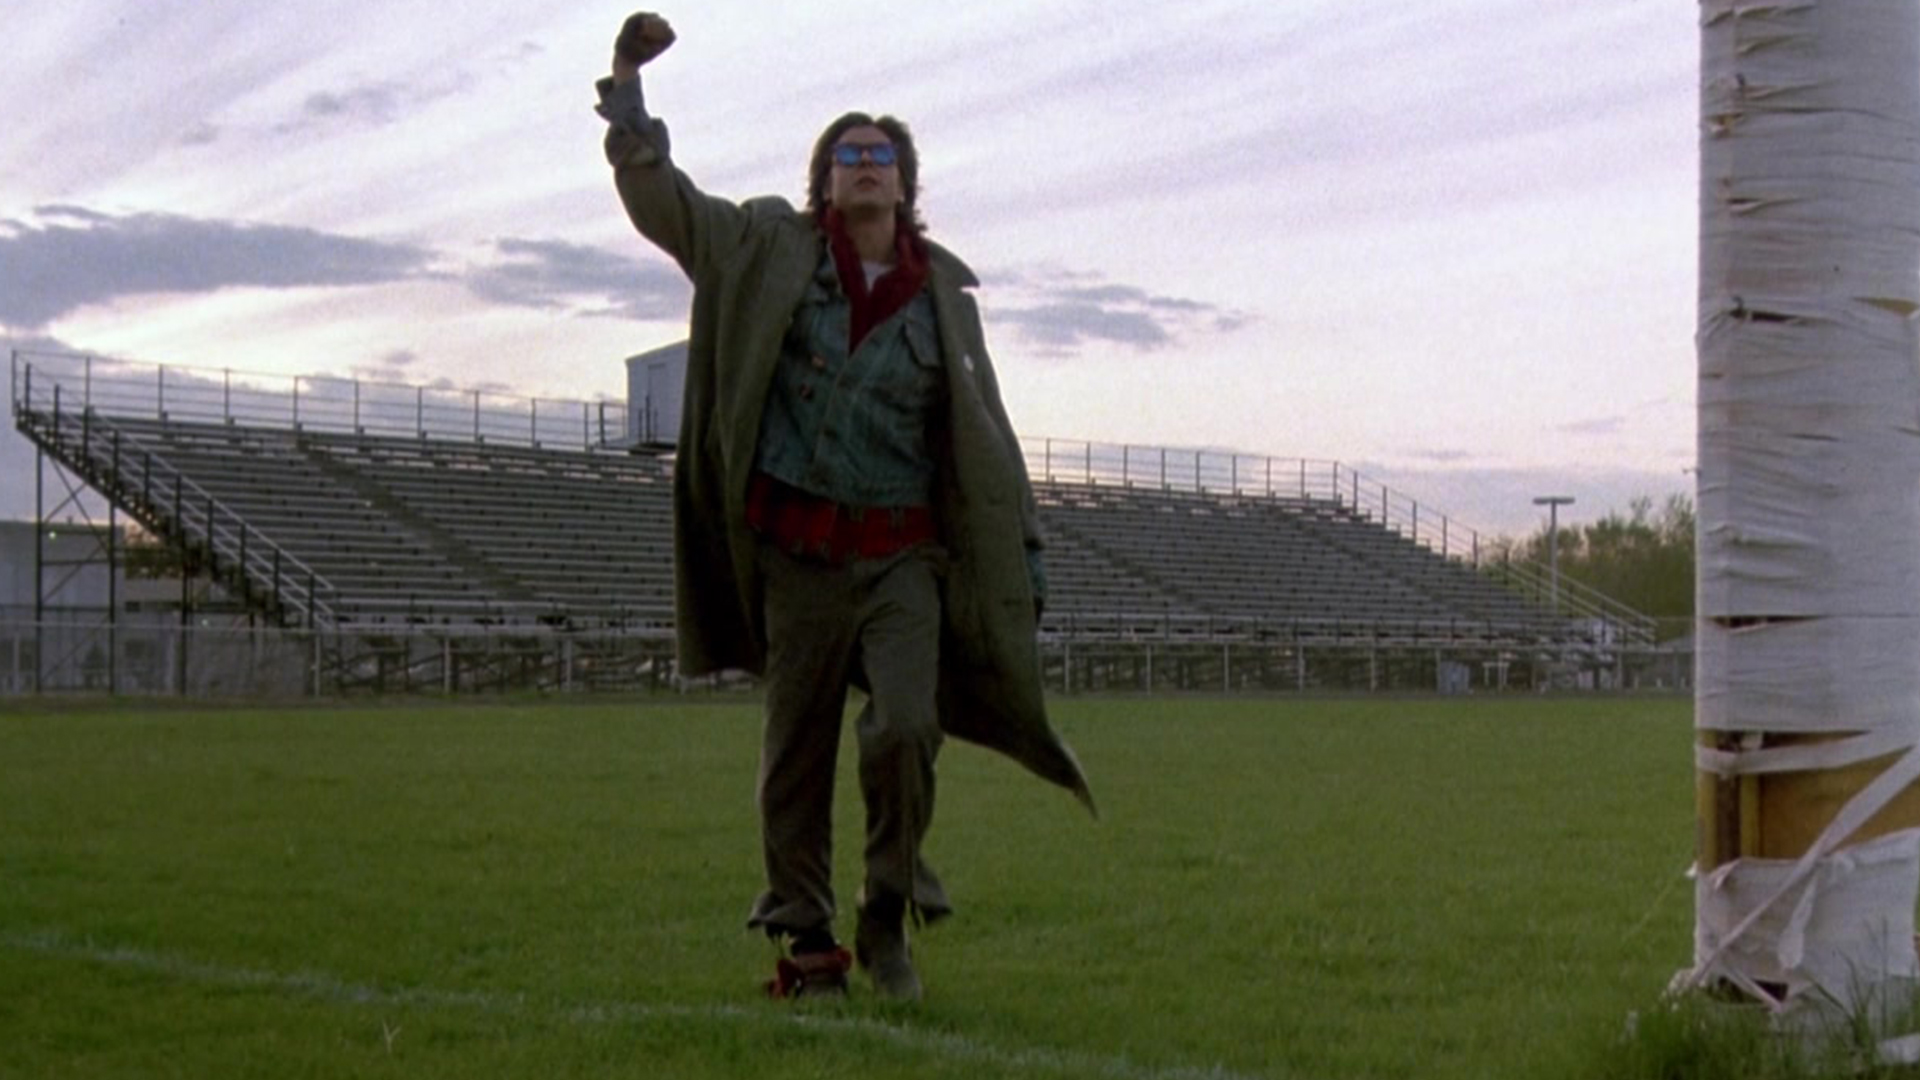 Judd nelson hd papers and backgrounds